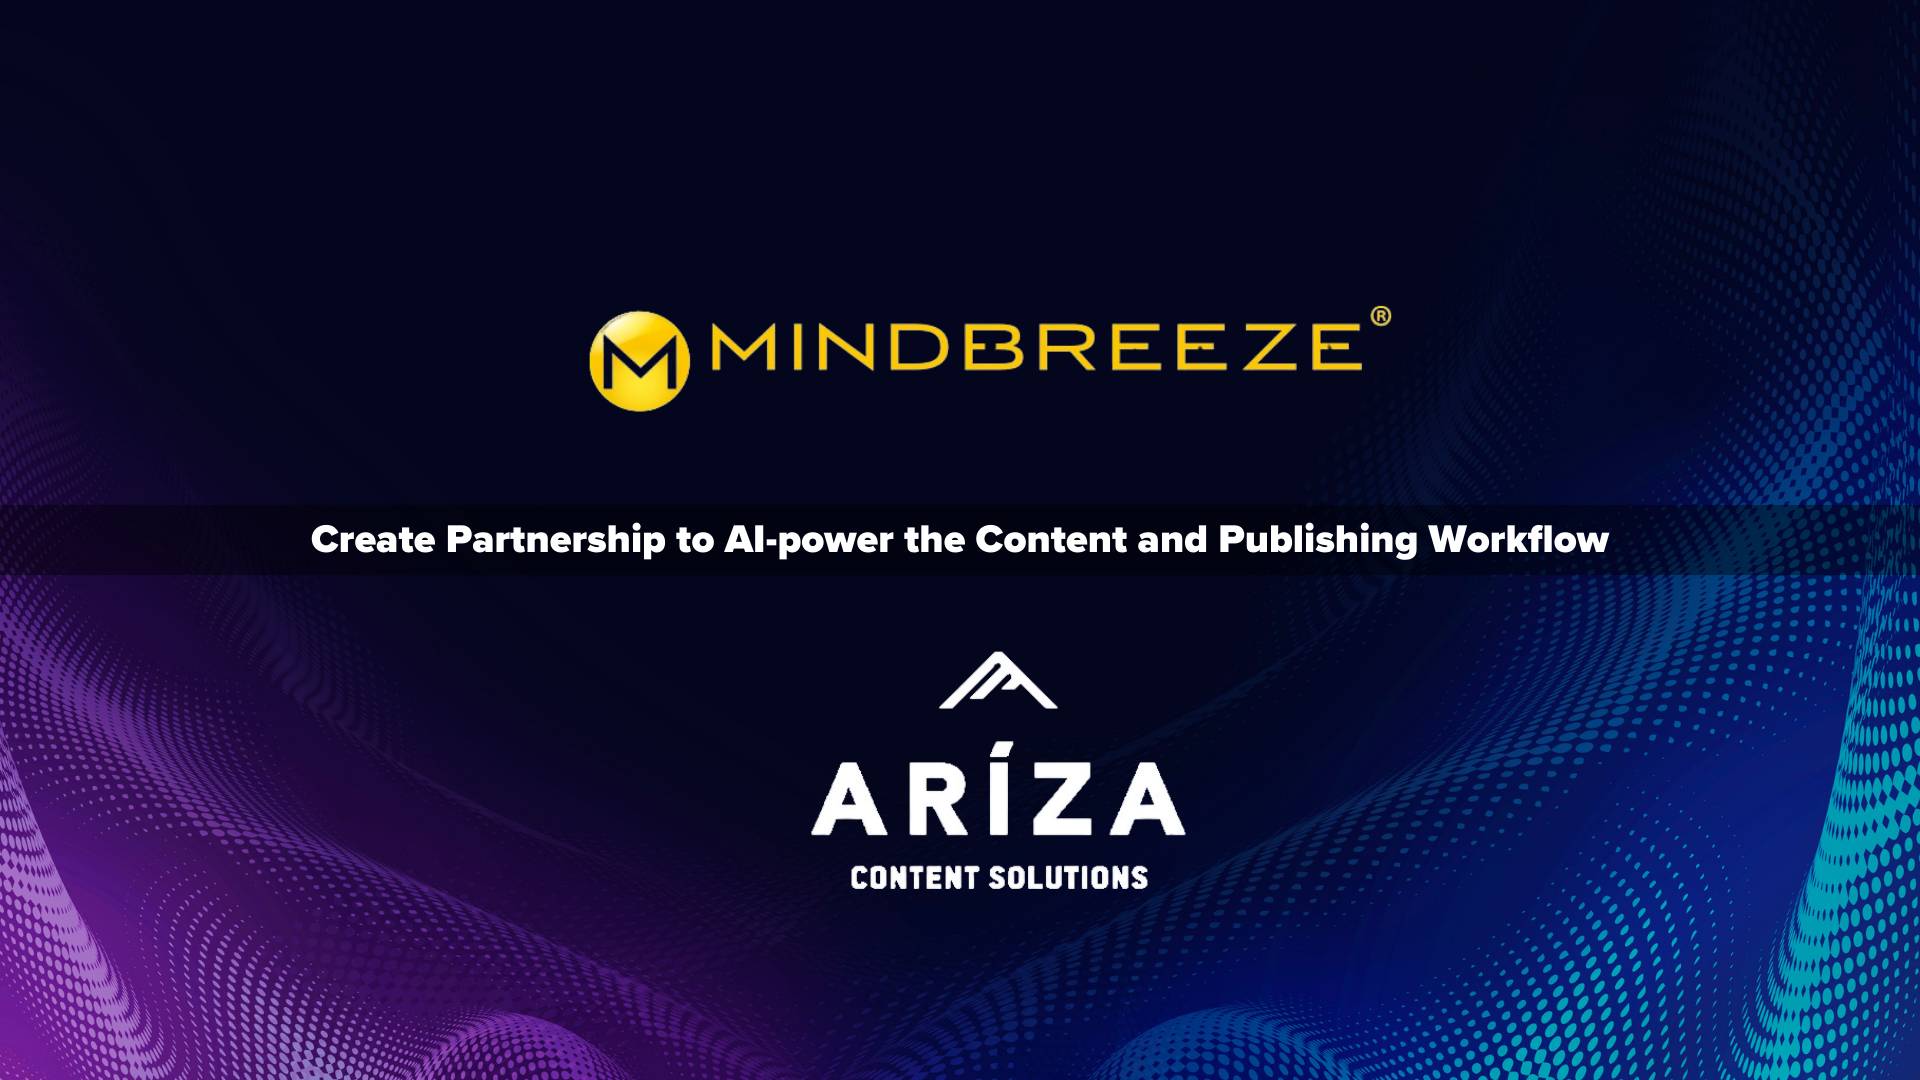 Mindbreeze and Ariza Content Solutions Create Partnership to AI-power the Content and Publishing Workflow